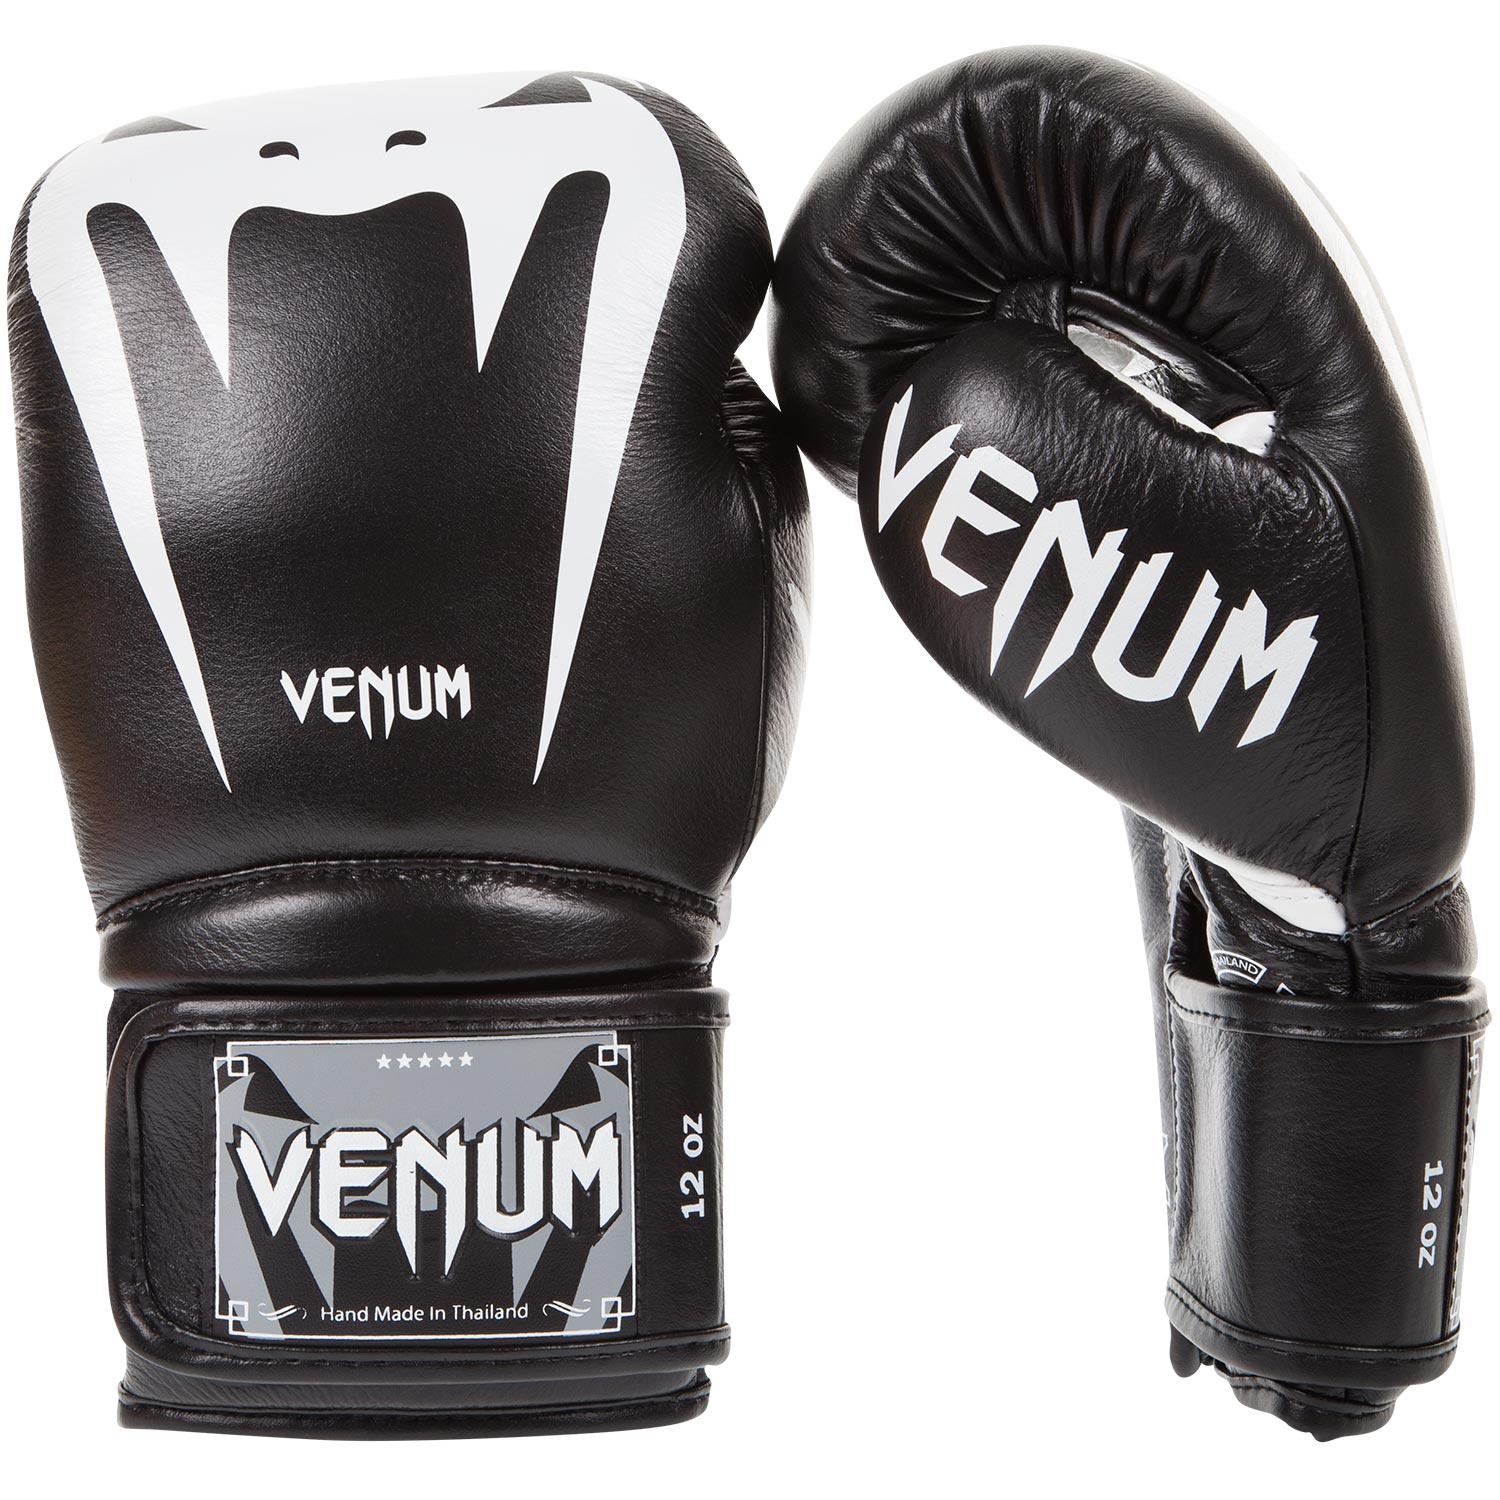 Venum Giant 3.0 Nappa Leather Hook and Loop Boxing Gloves - 12 oz. - Black/White - image 1 of 5